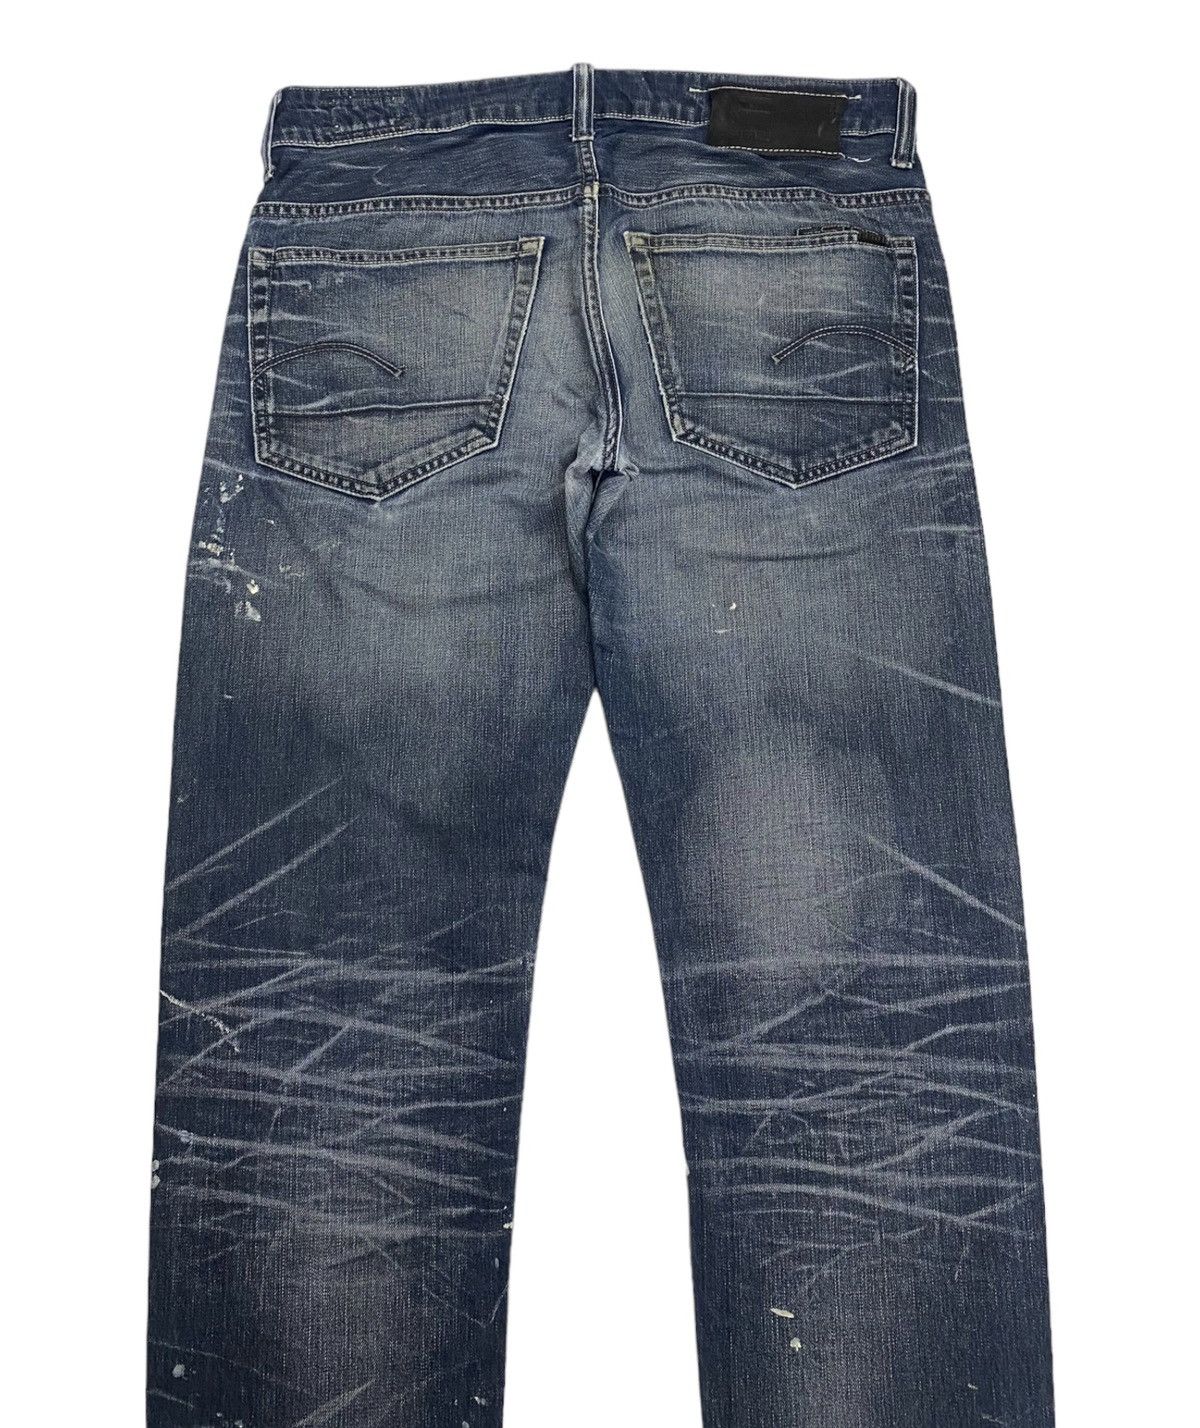 Archival Clothing - G-STAR RAW DISTRESSED PAINTED 3301 UNDERCOVER STYLE JEANS - 4